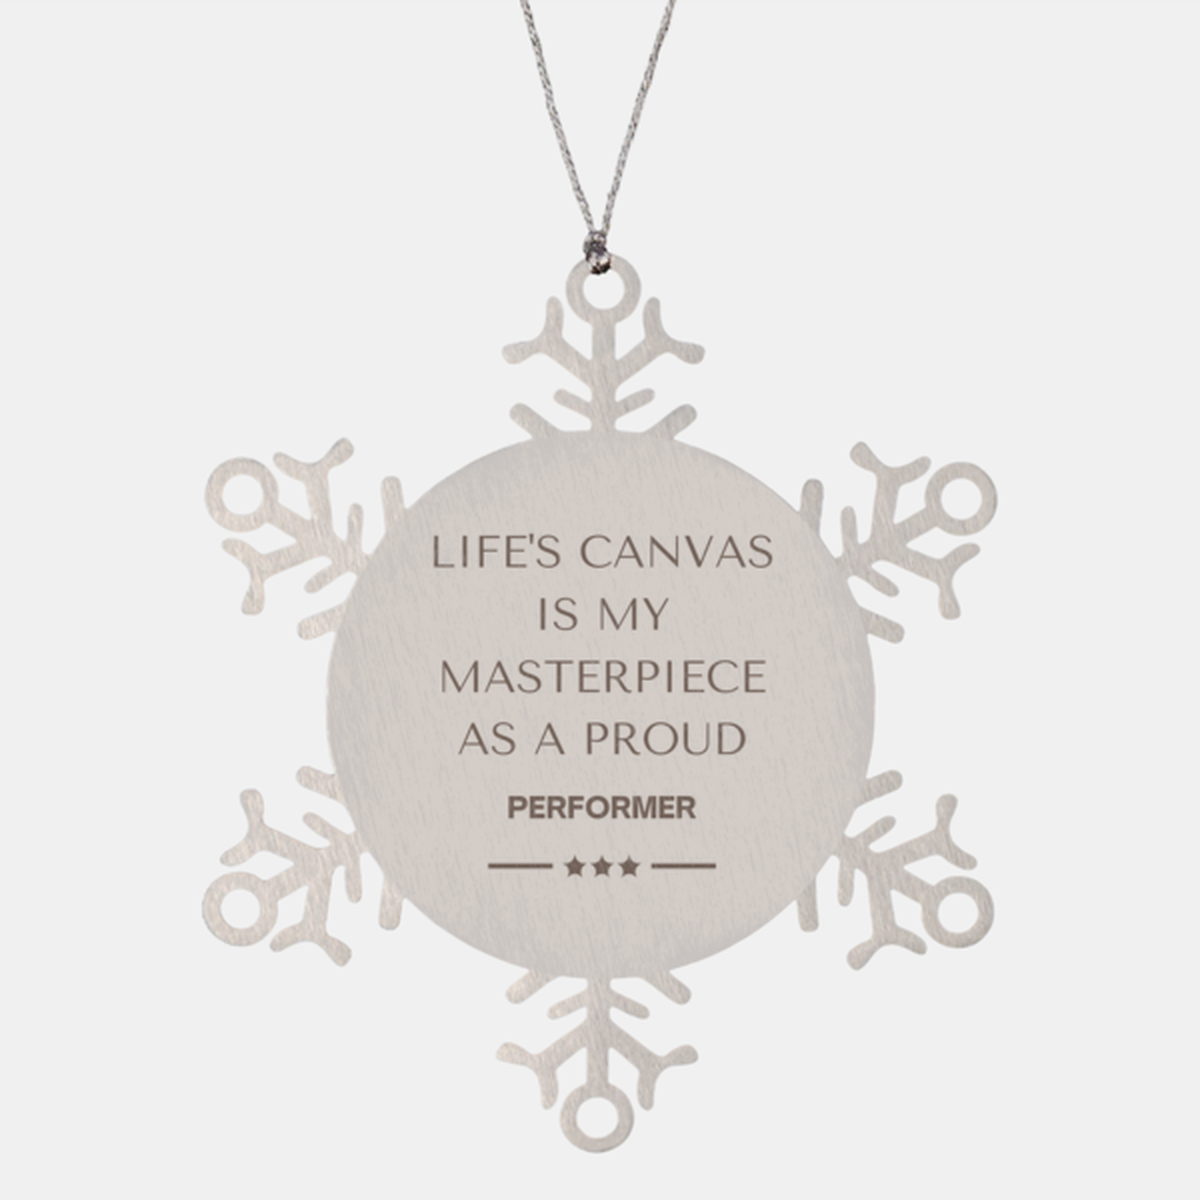 Proud Performer Gifts, Life's canvas is my masterpiece, Epic Birthday Christmas Unique Snowflake Ornament For Performer, Coworkers, Men, Women, Friends